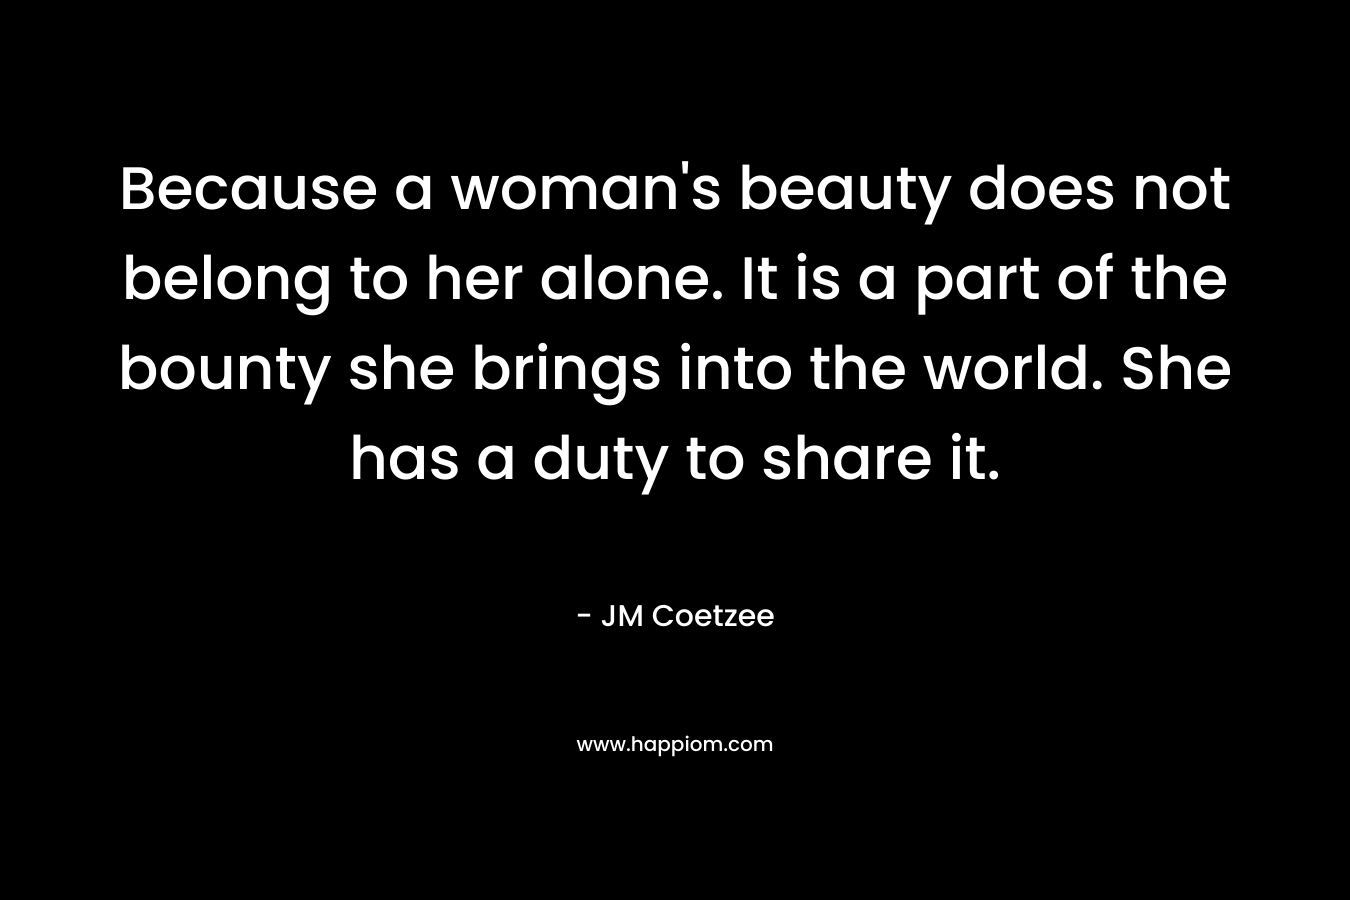 Because a woman's beauty does not belong to her alone. It is a part of the bounty she brings into the world. She has a duty to share it.